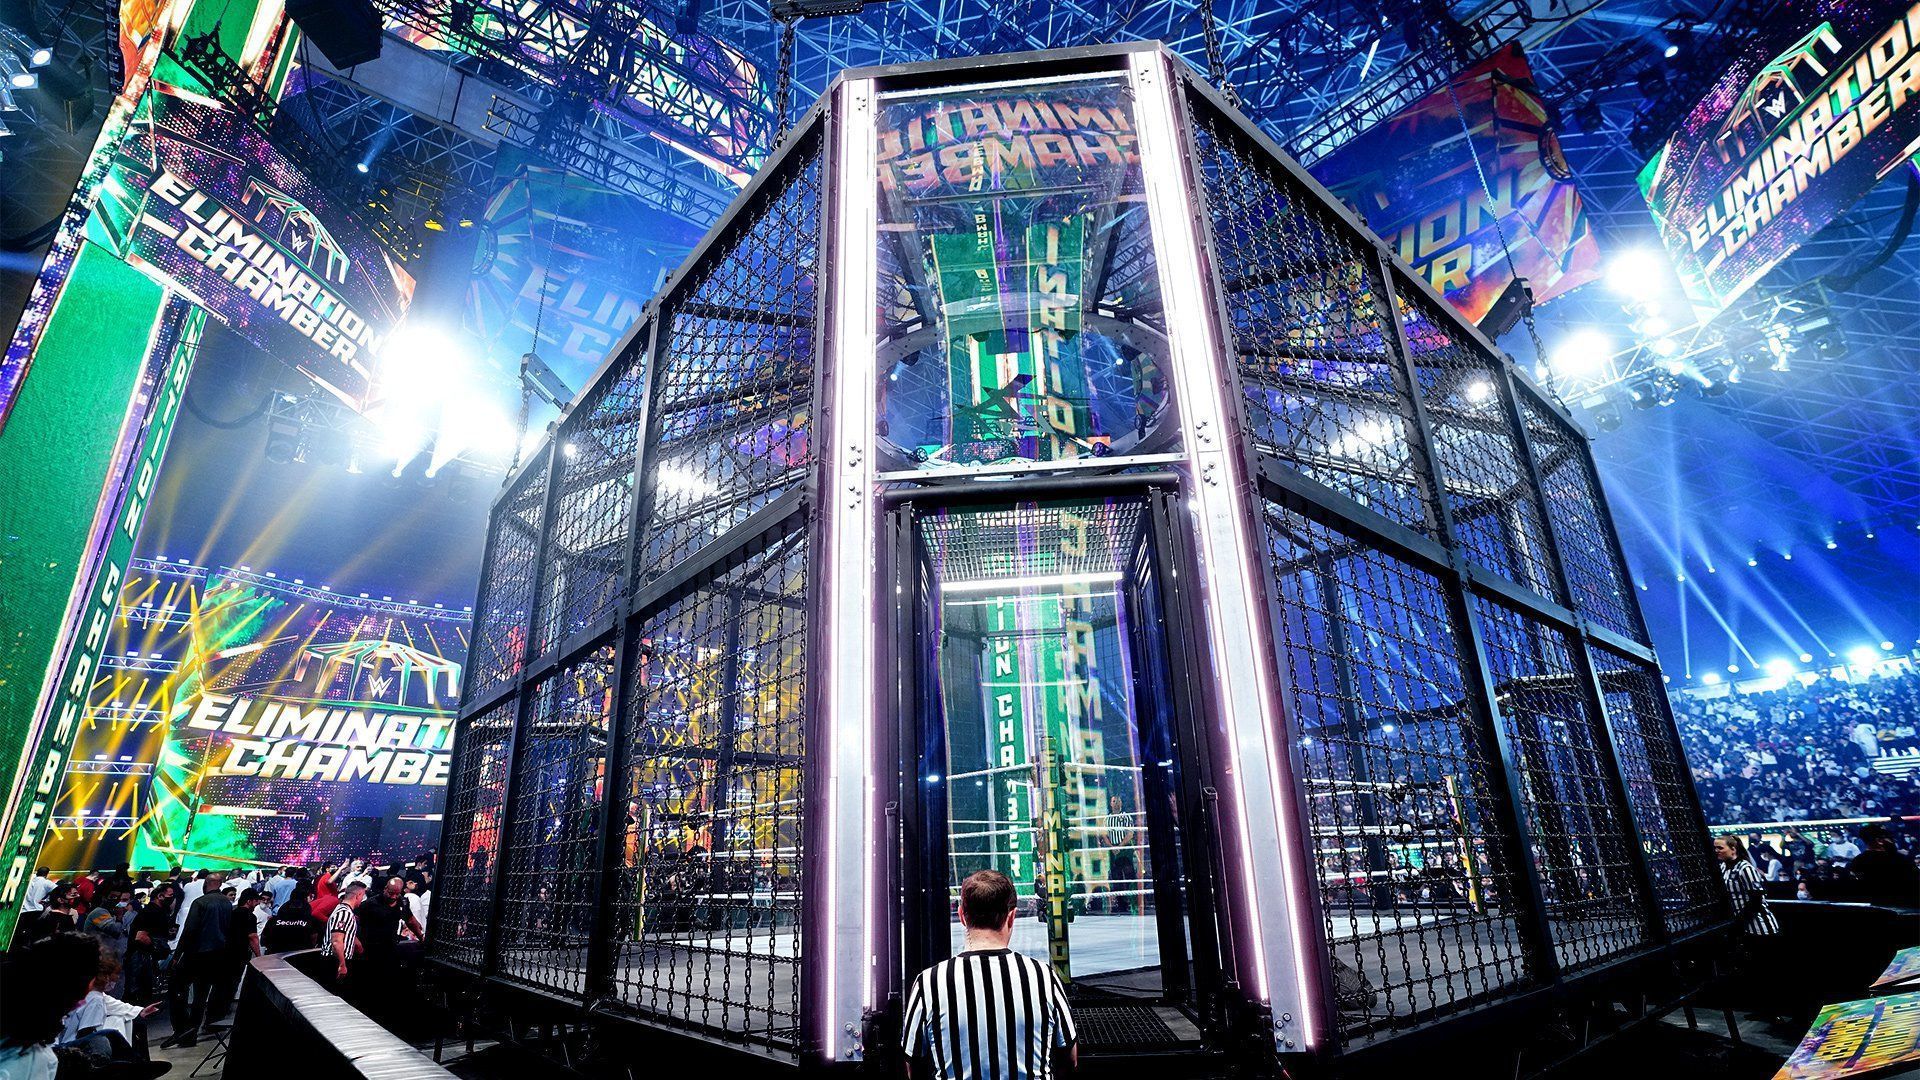 The steel structure for the WWE Elimination Chamber match